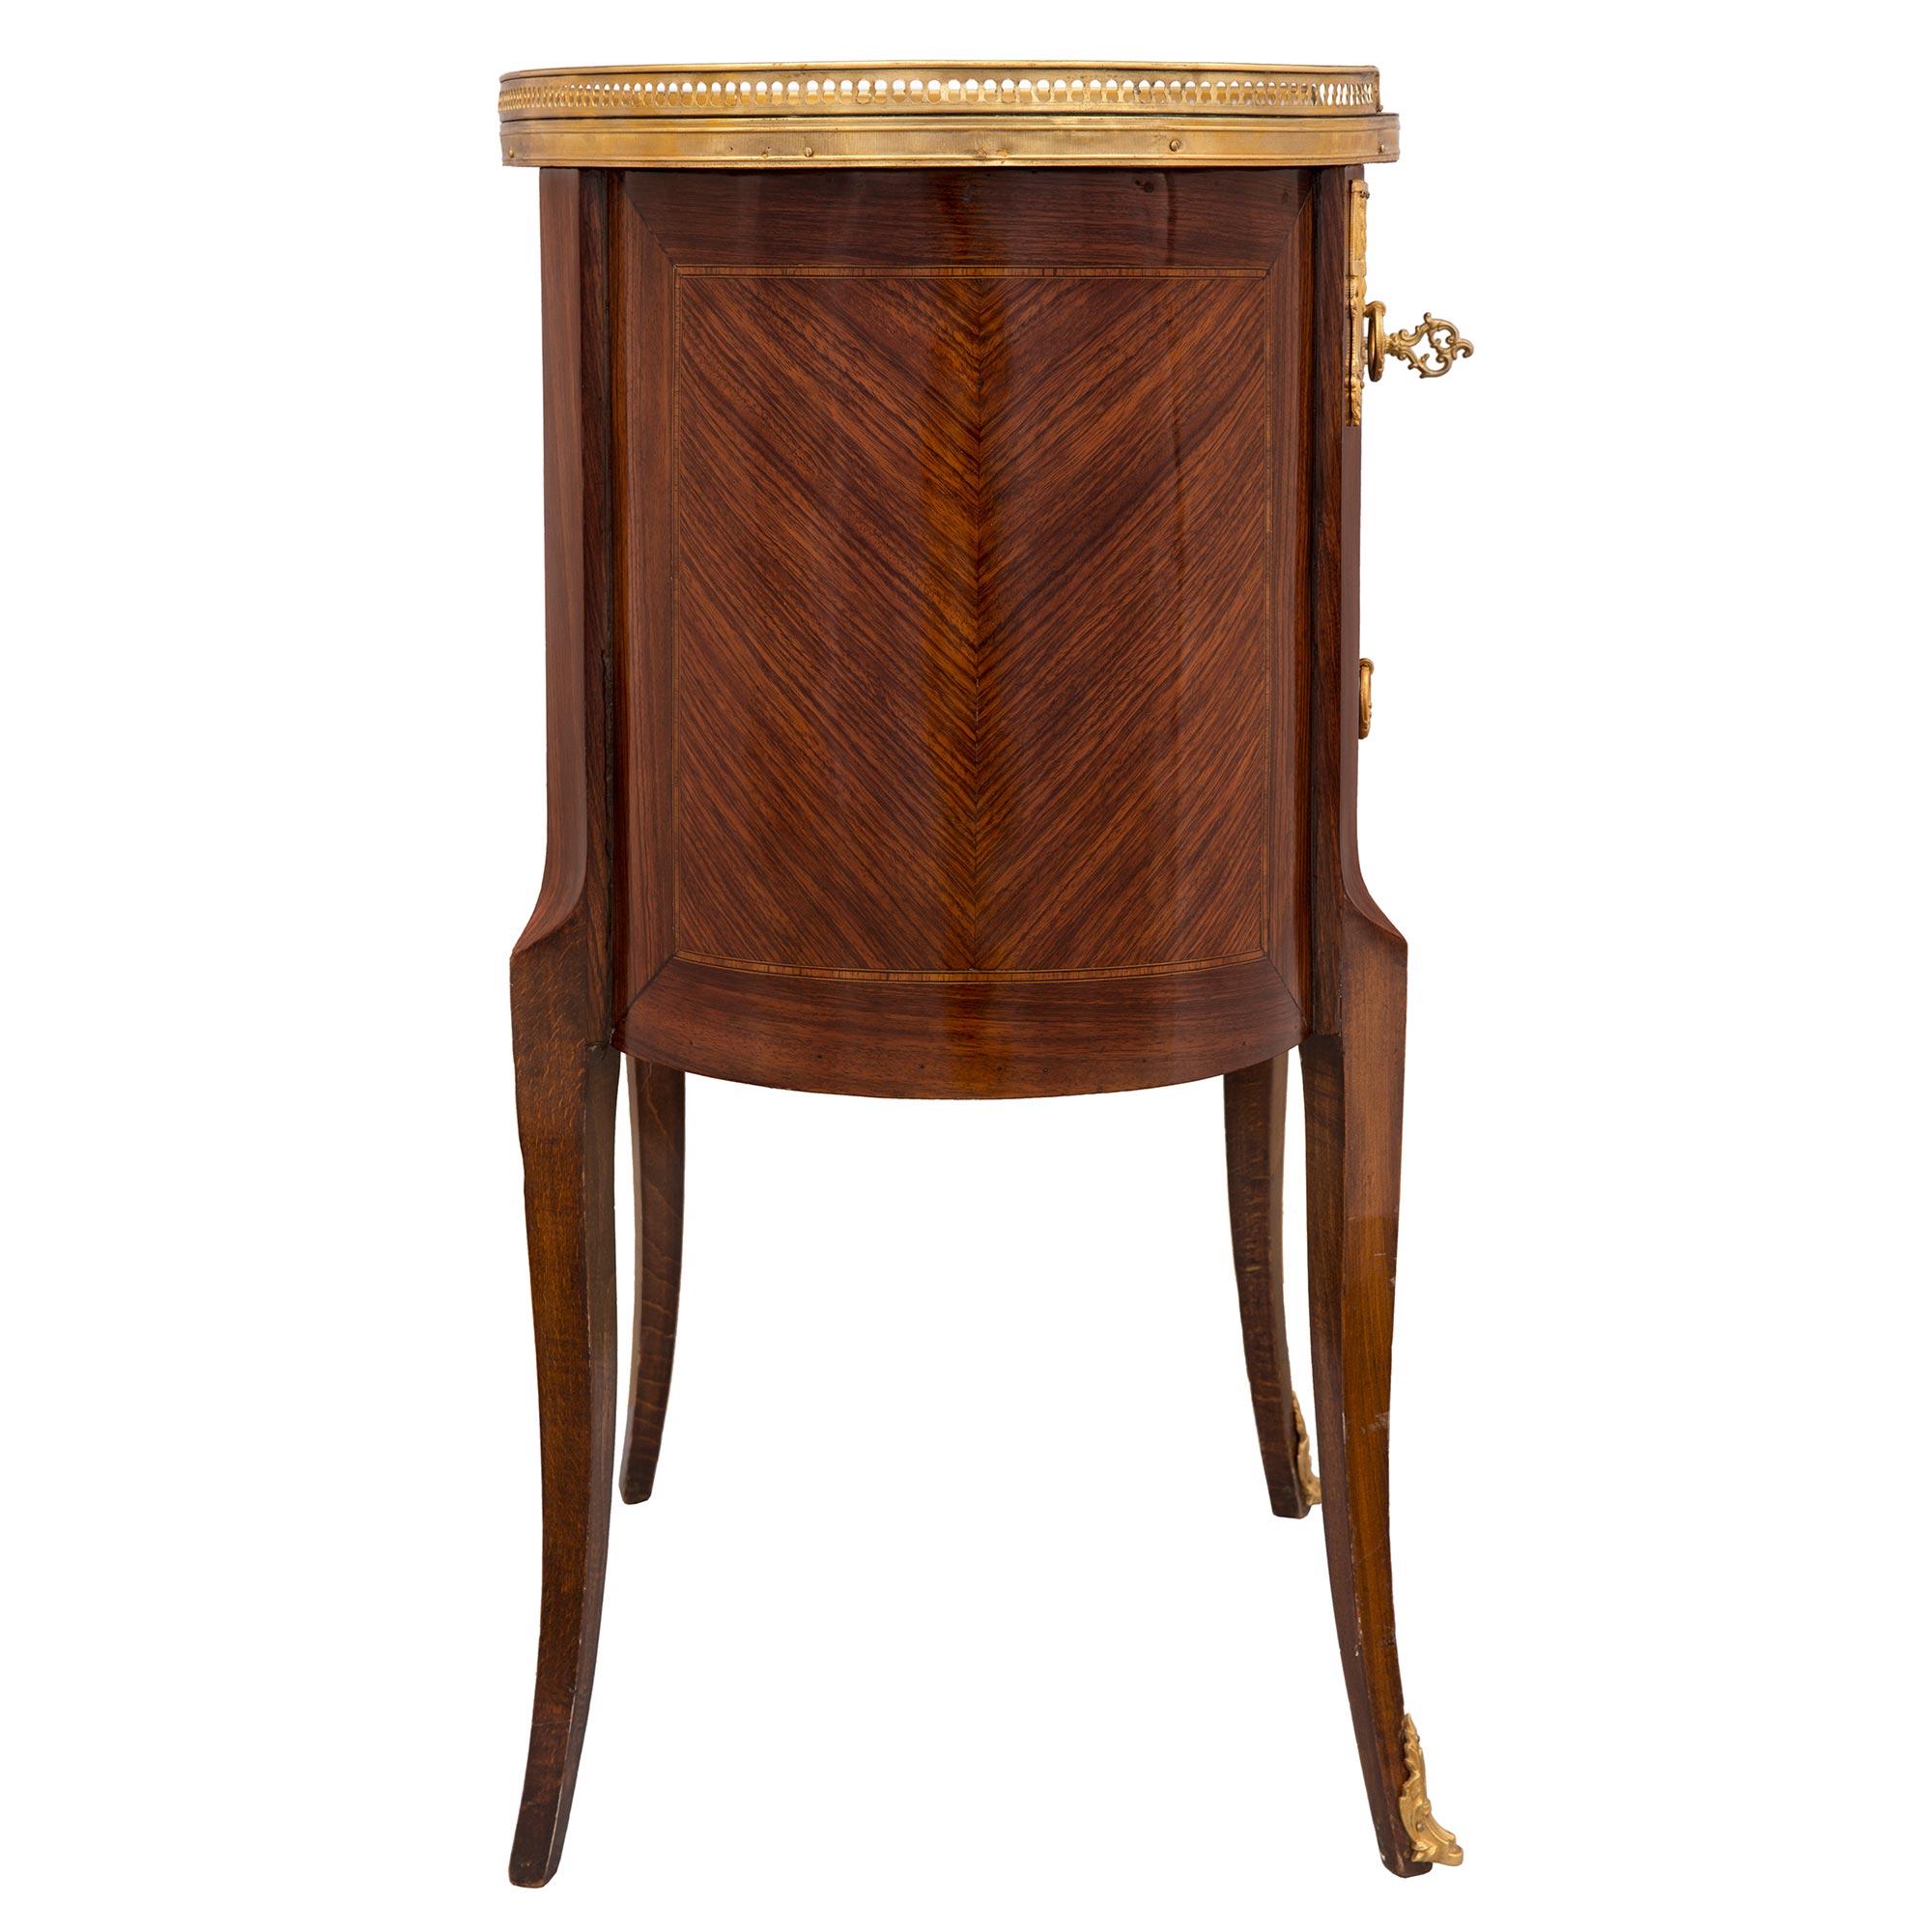 French 19th Century Transitional Style Kingwood, Boxwood and Ormolu Side Table For Sale 2